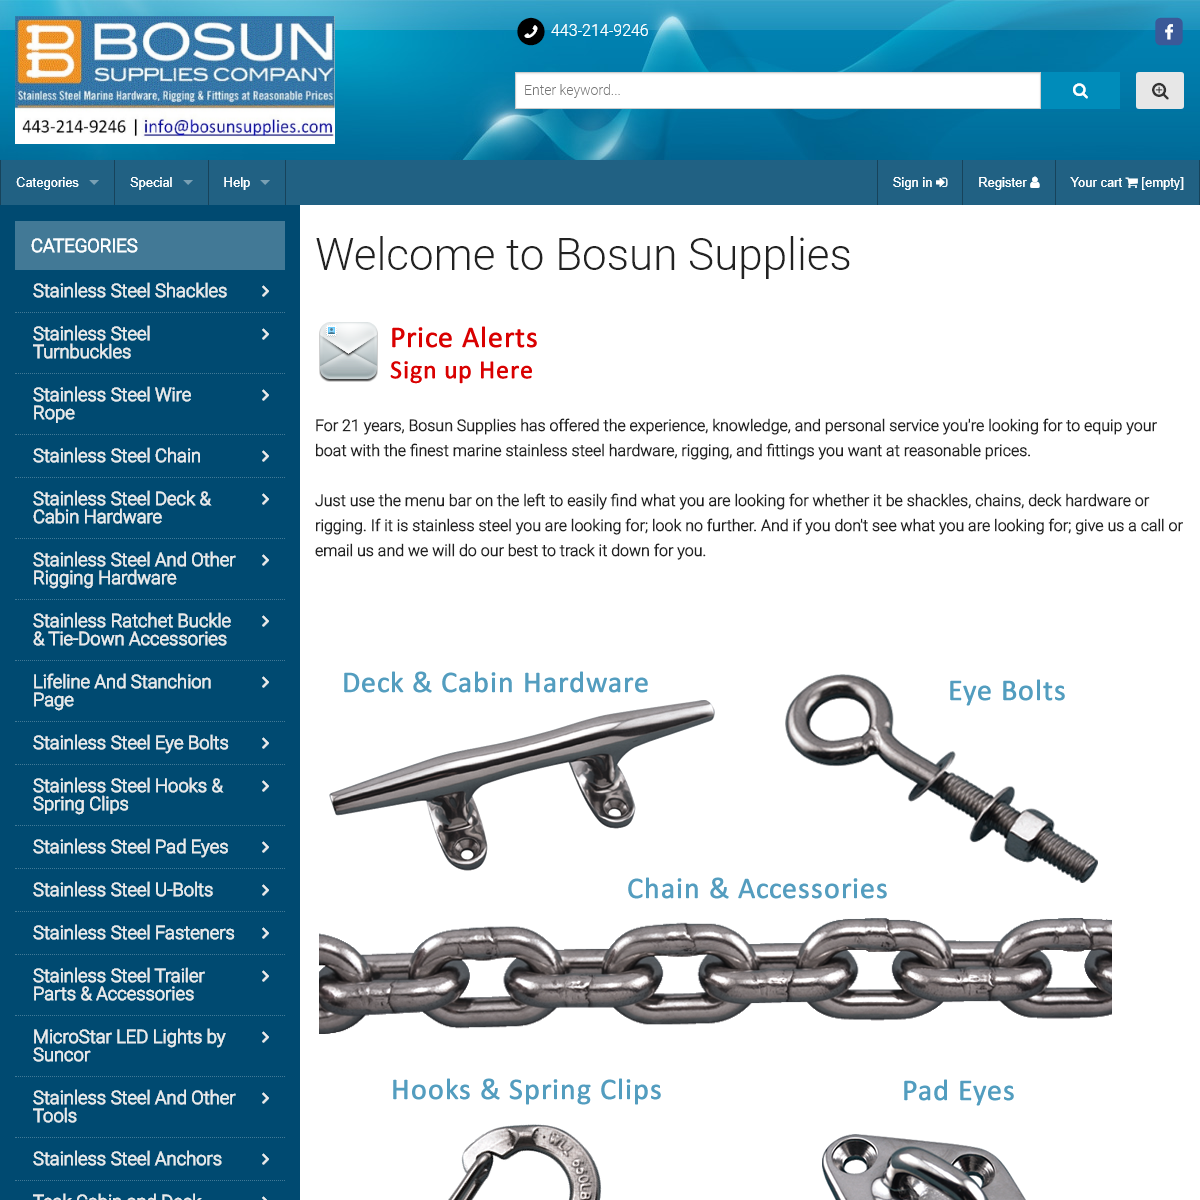 A complete backup of bosunsupplies.com